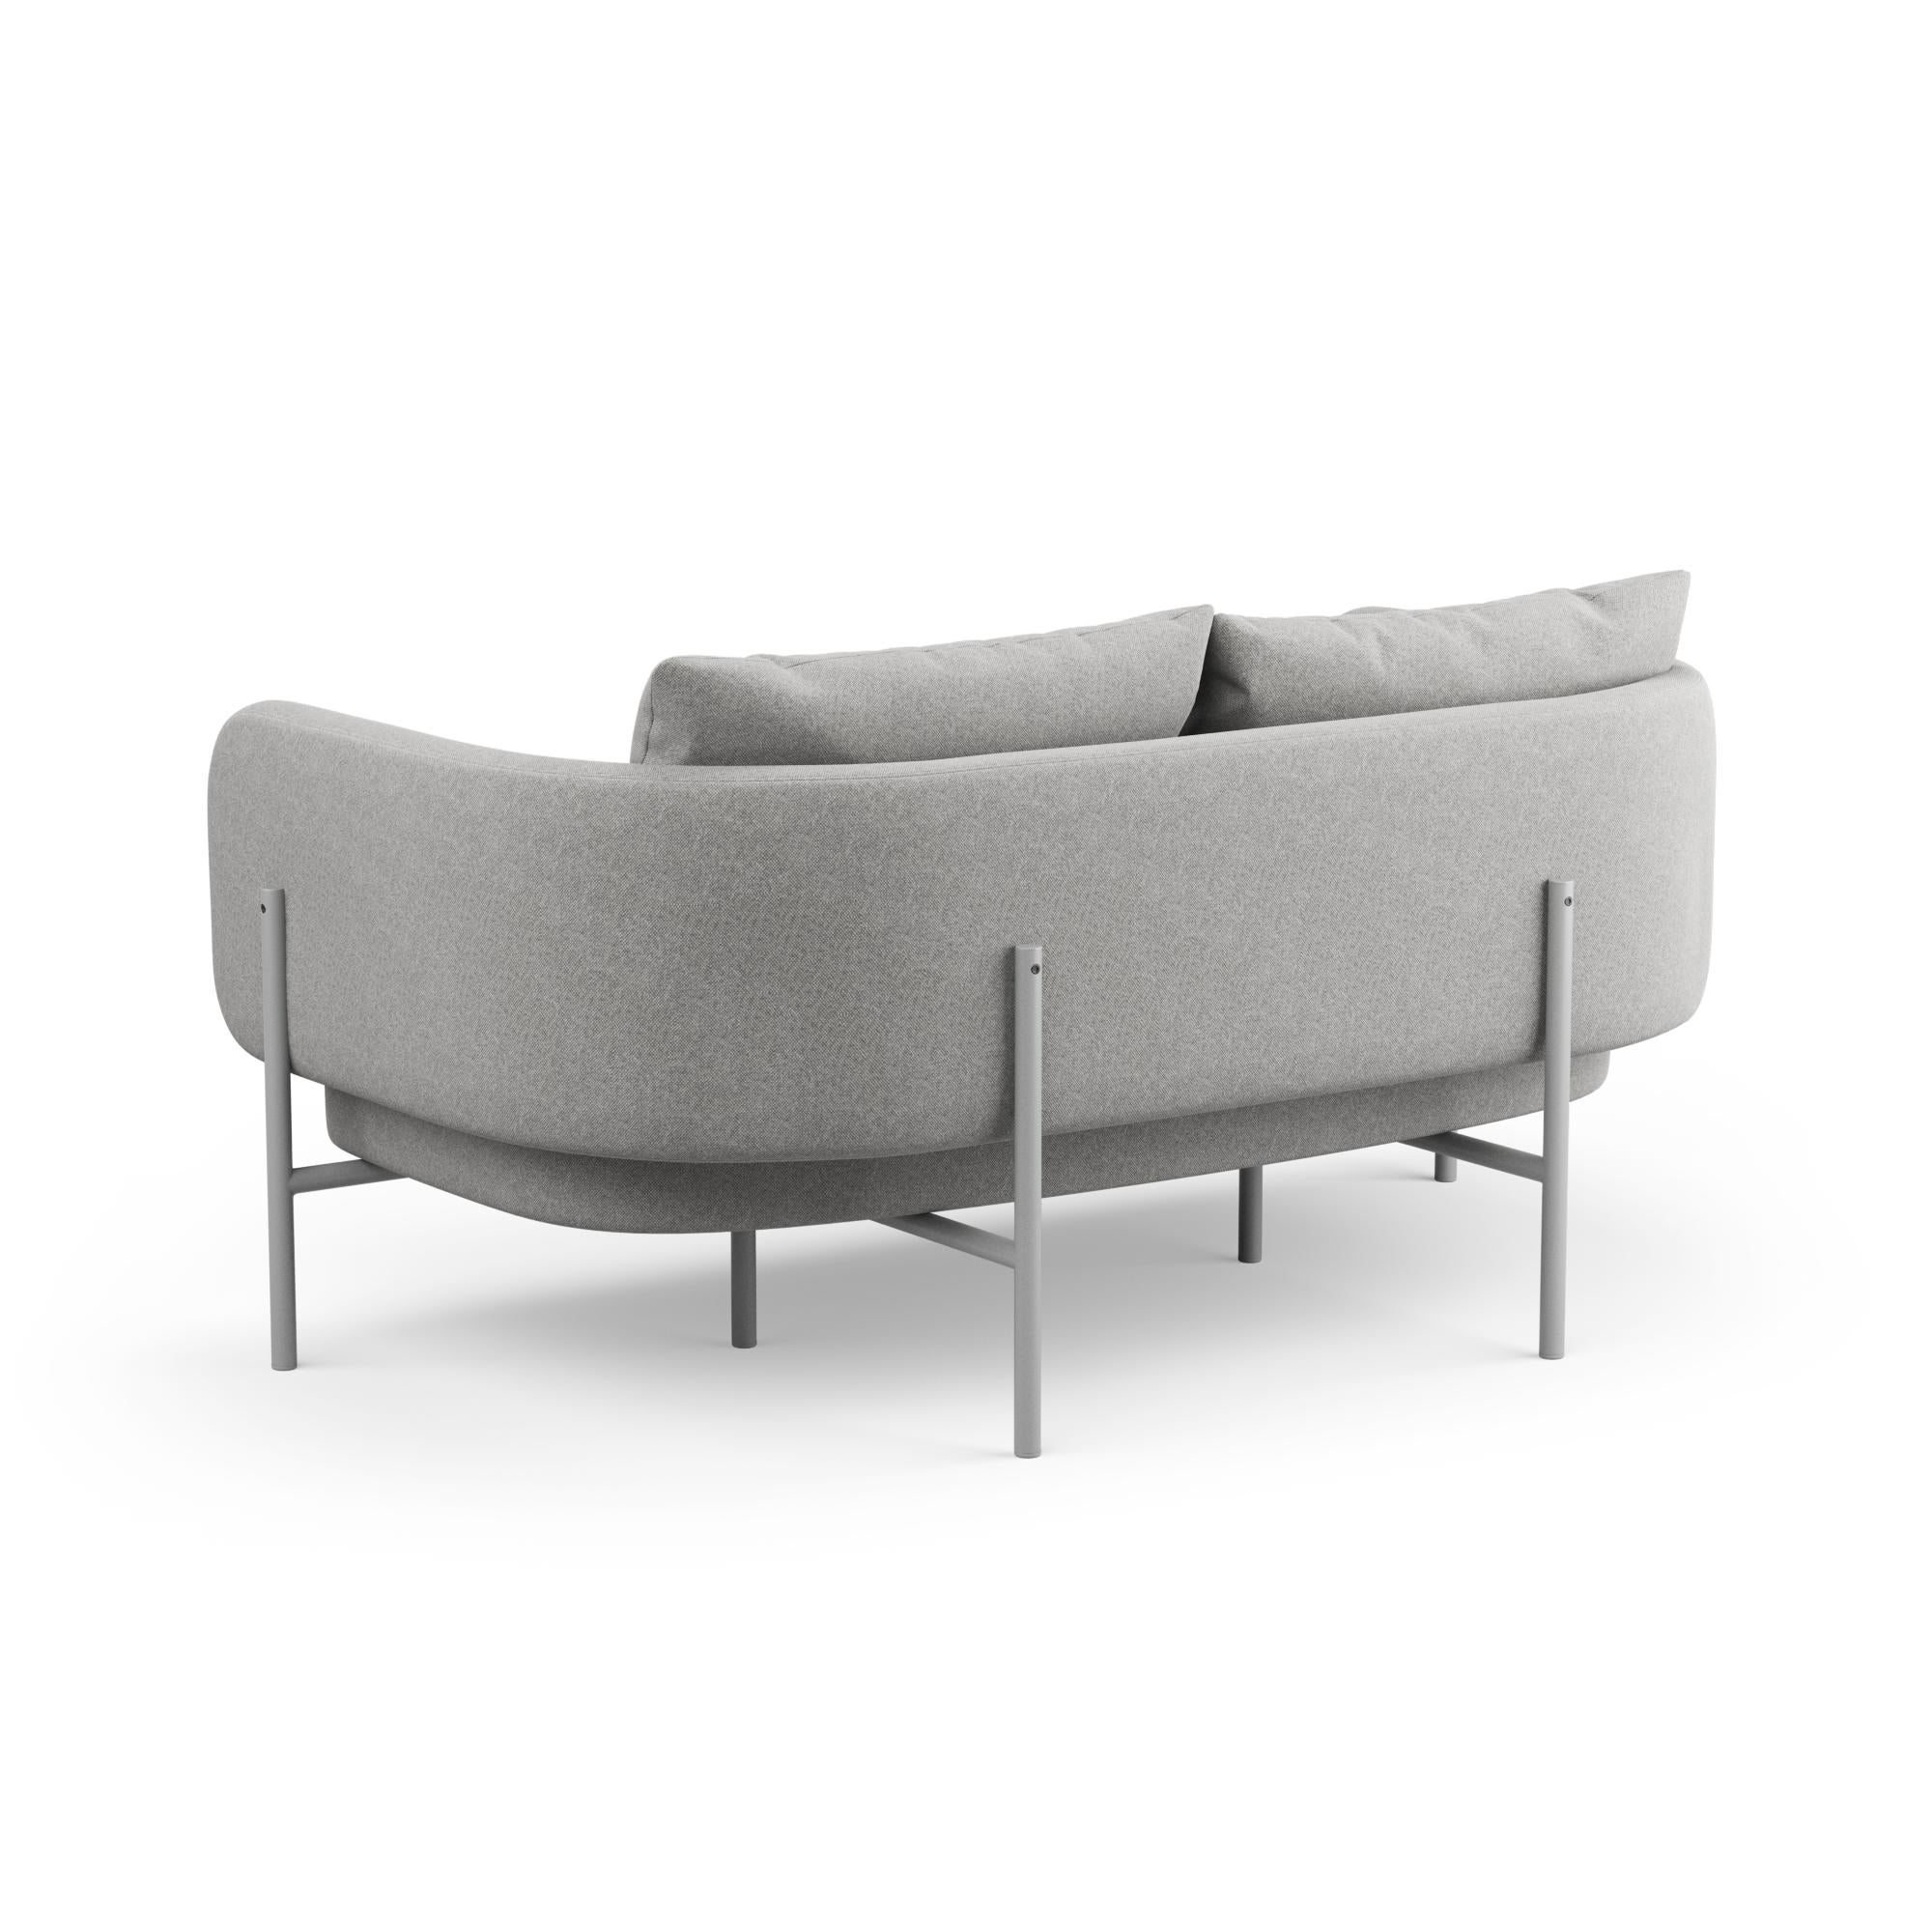 European Hayche Abrazo 2 Seater Sofa - Grey, UK, Made to Order For Sale